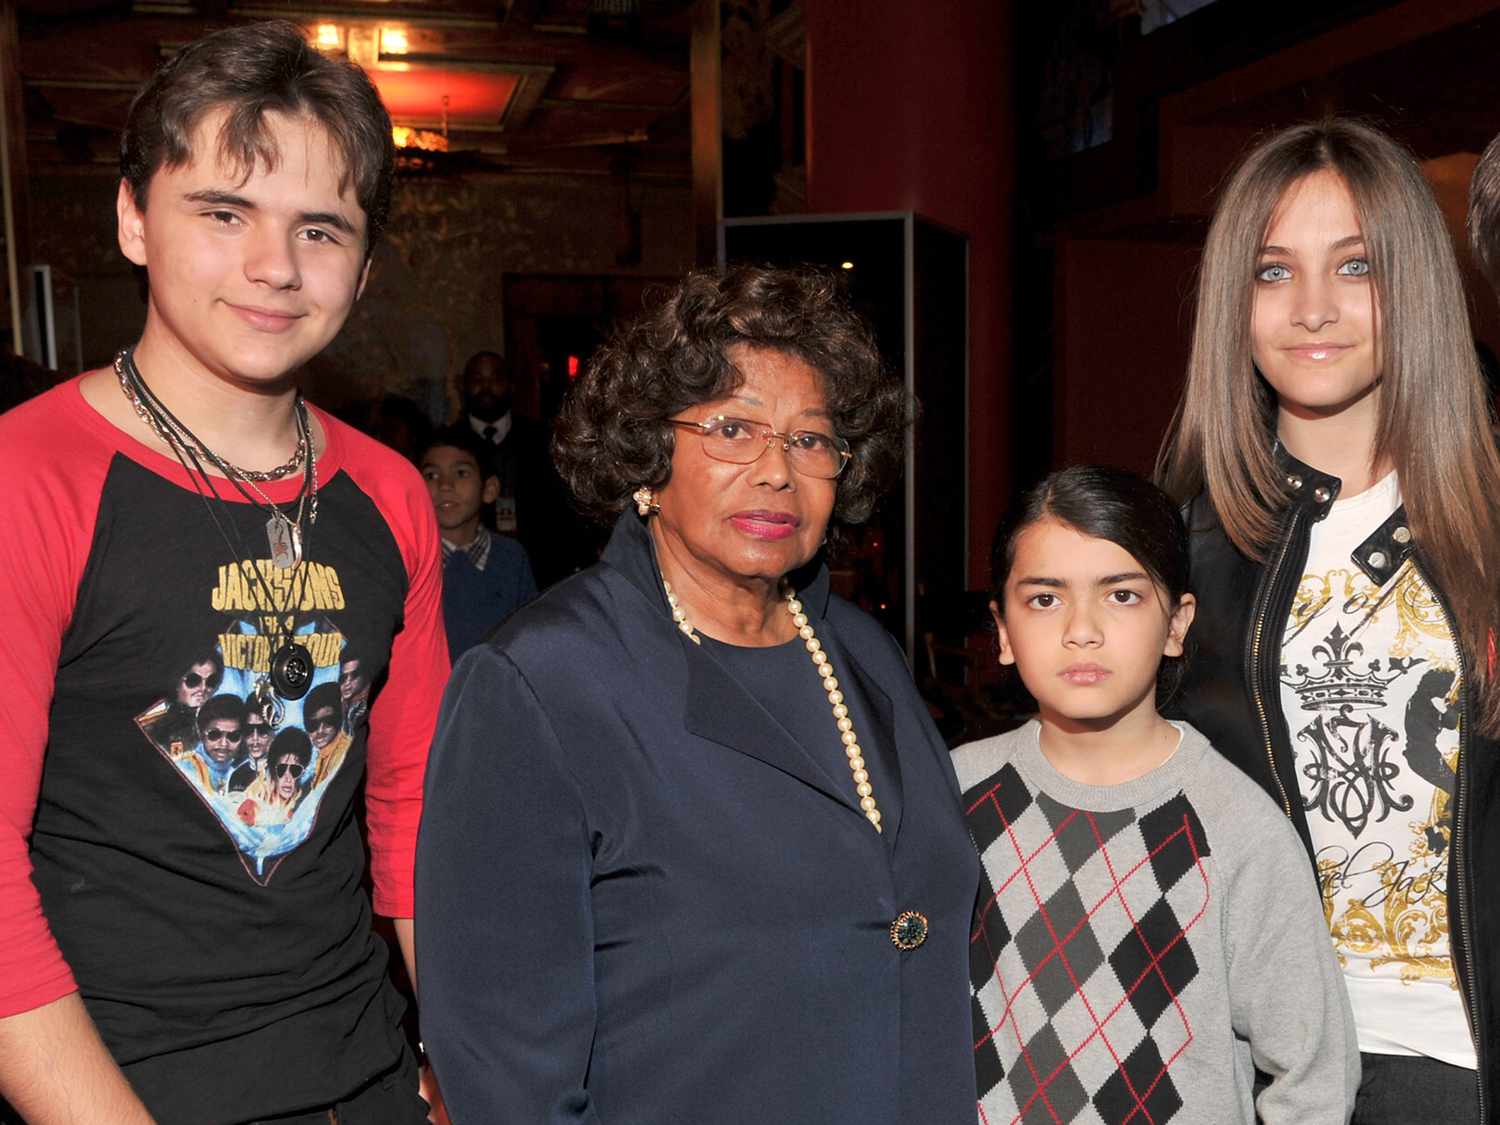 Prince Michael Jackson, Katherine Jackson, Blanket Jackson, and Paris Jackson attend the immortalization of Michael Jackson at Grauman's Chinese Theatre Hand & Footprint ceremony on January 26, 2012 in Los Angeles, California. 